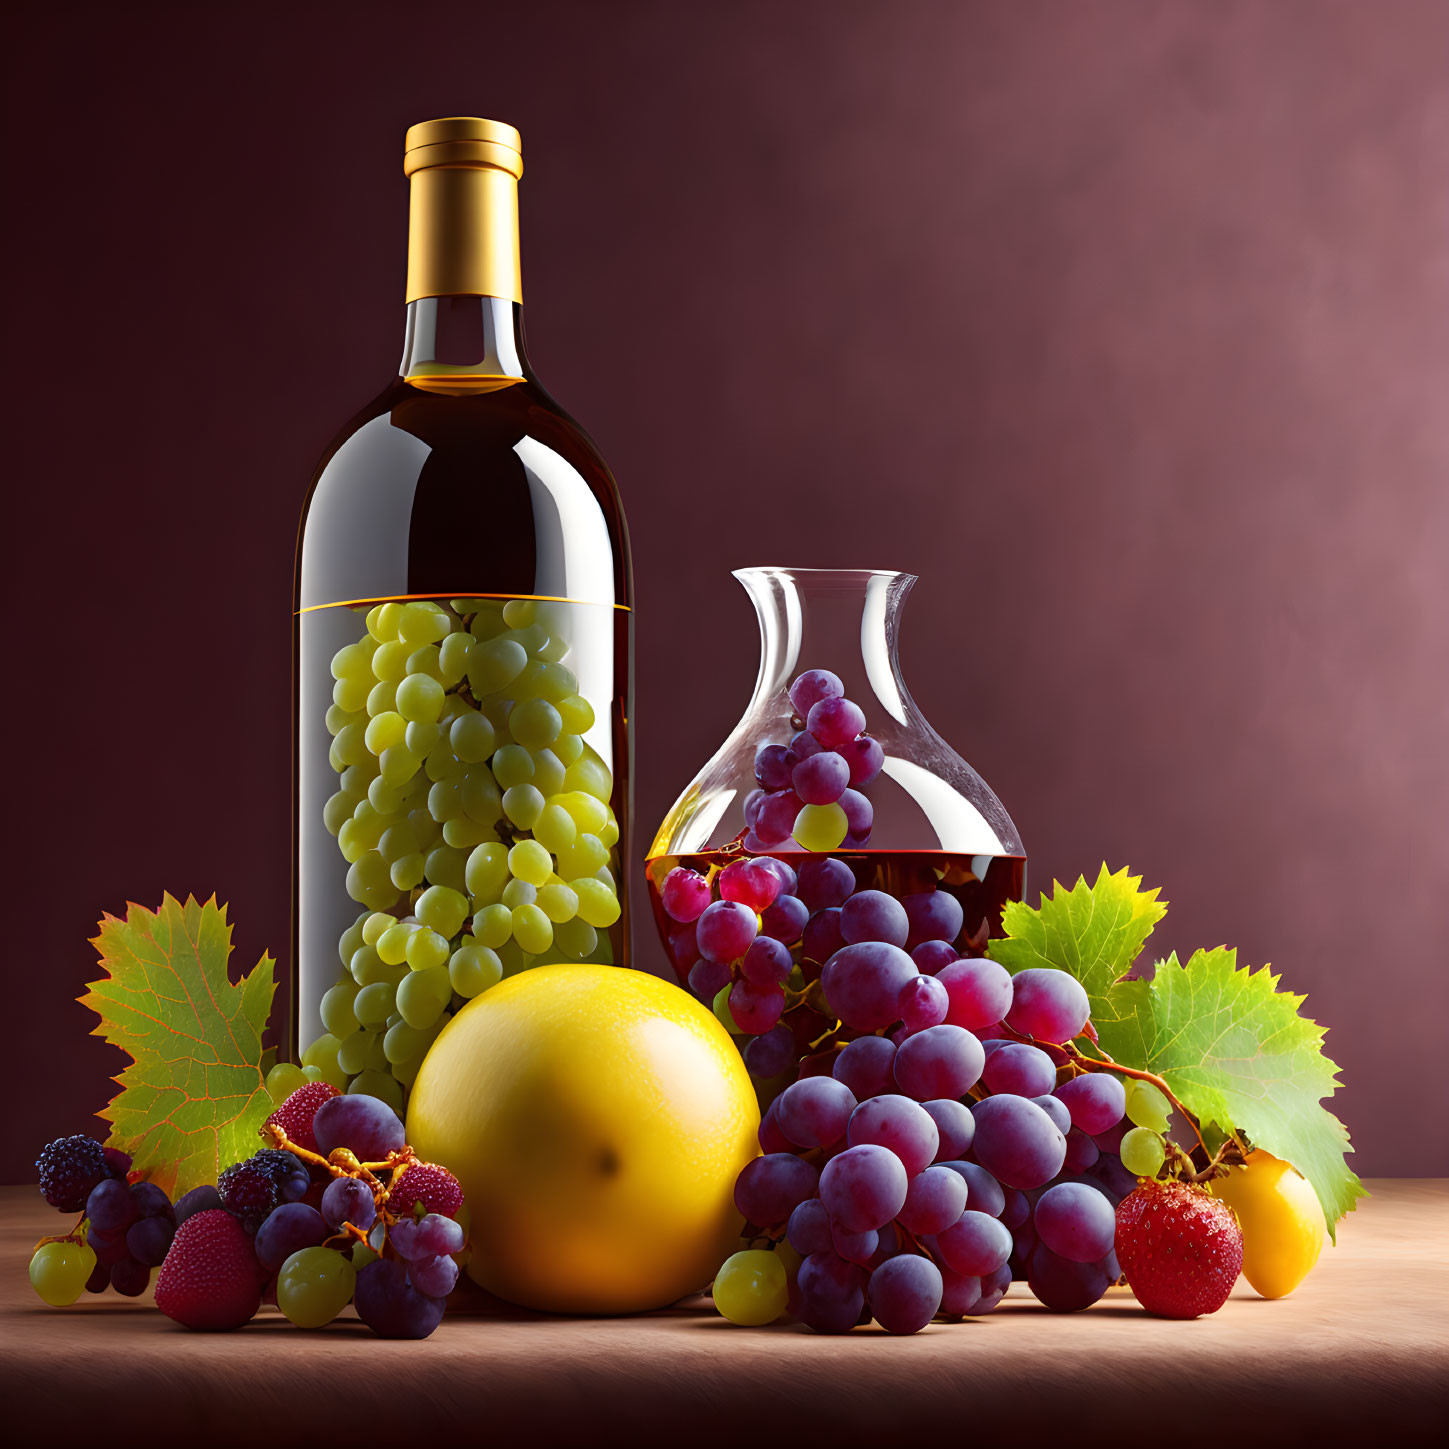 Still-life composition featuring wine bottle, decanter, grapes, lemon, and berries on dark background